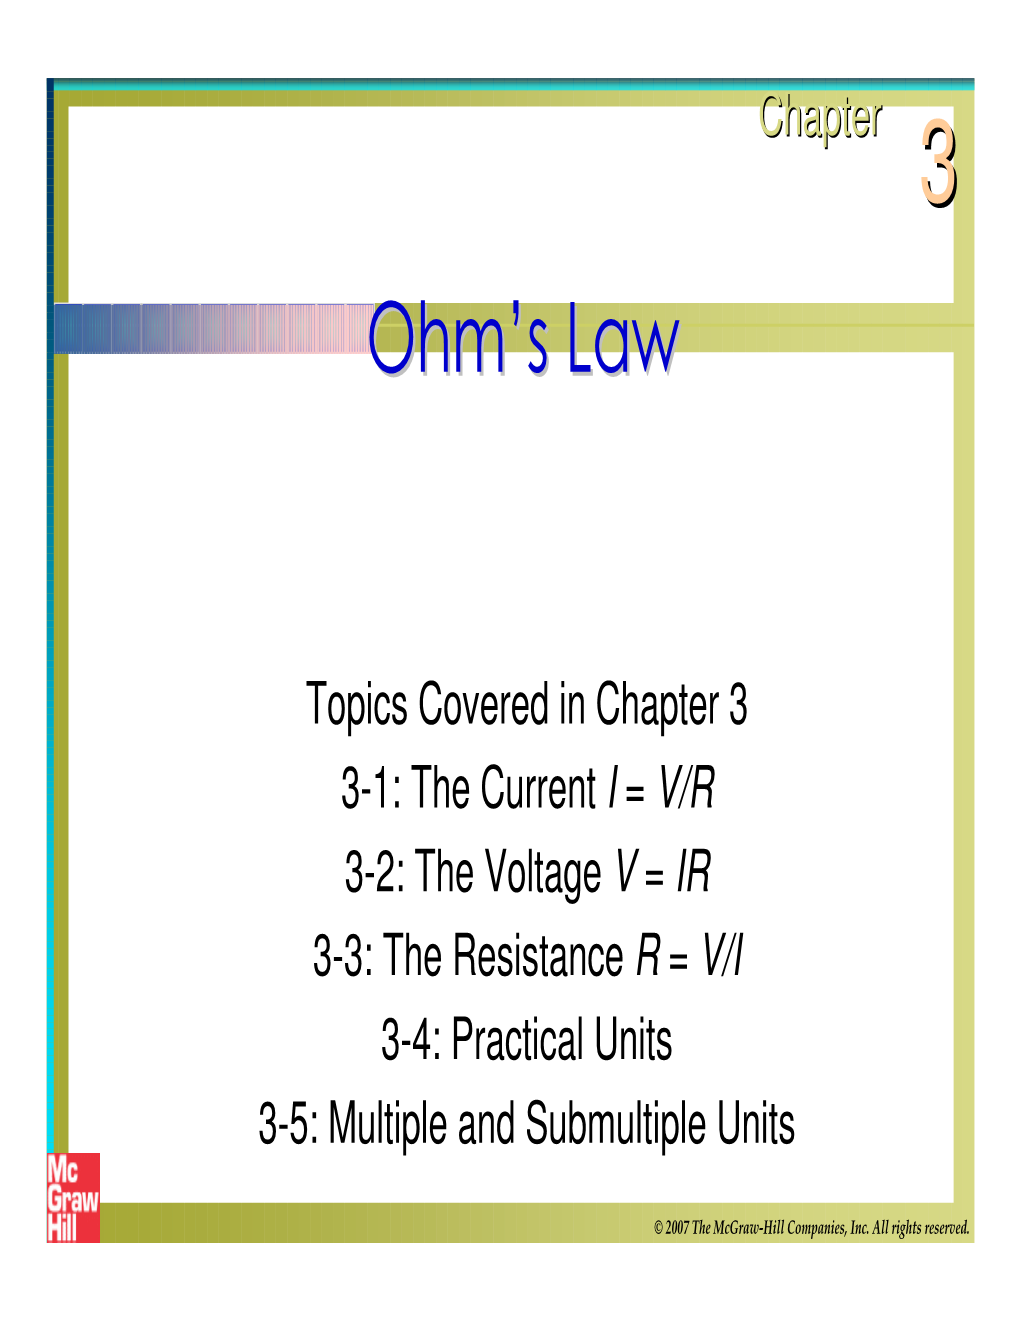 Ohm's Law States That, in an Electrical Circuit, the Current Passing Through Most Materials Is Directly Proportional to the Potential Difference Applied Across Them